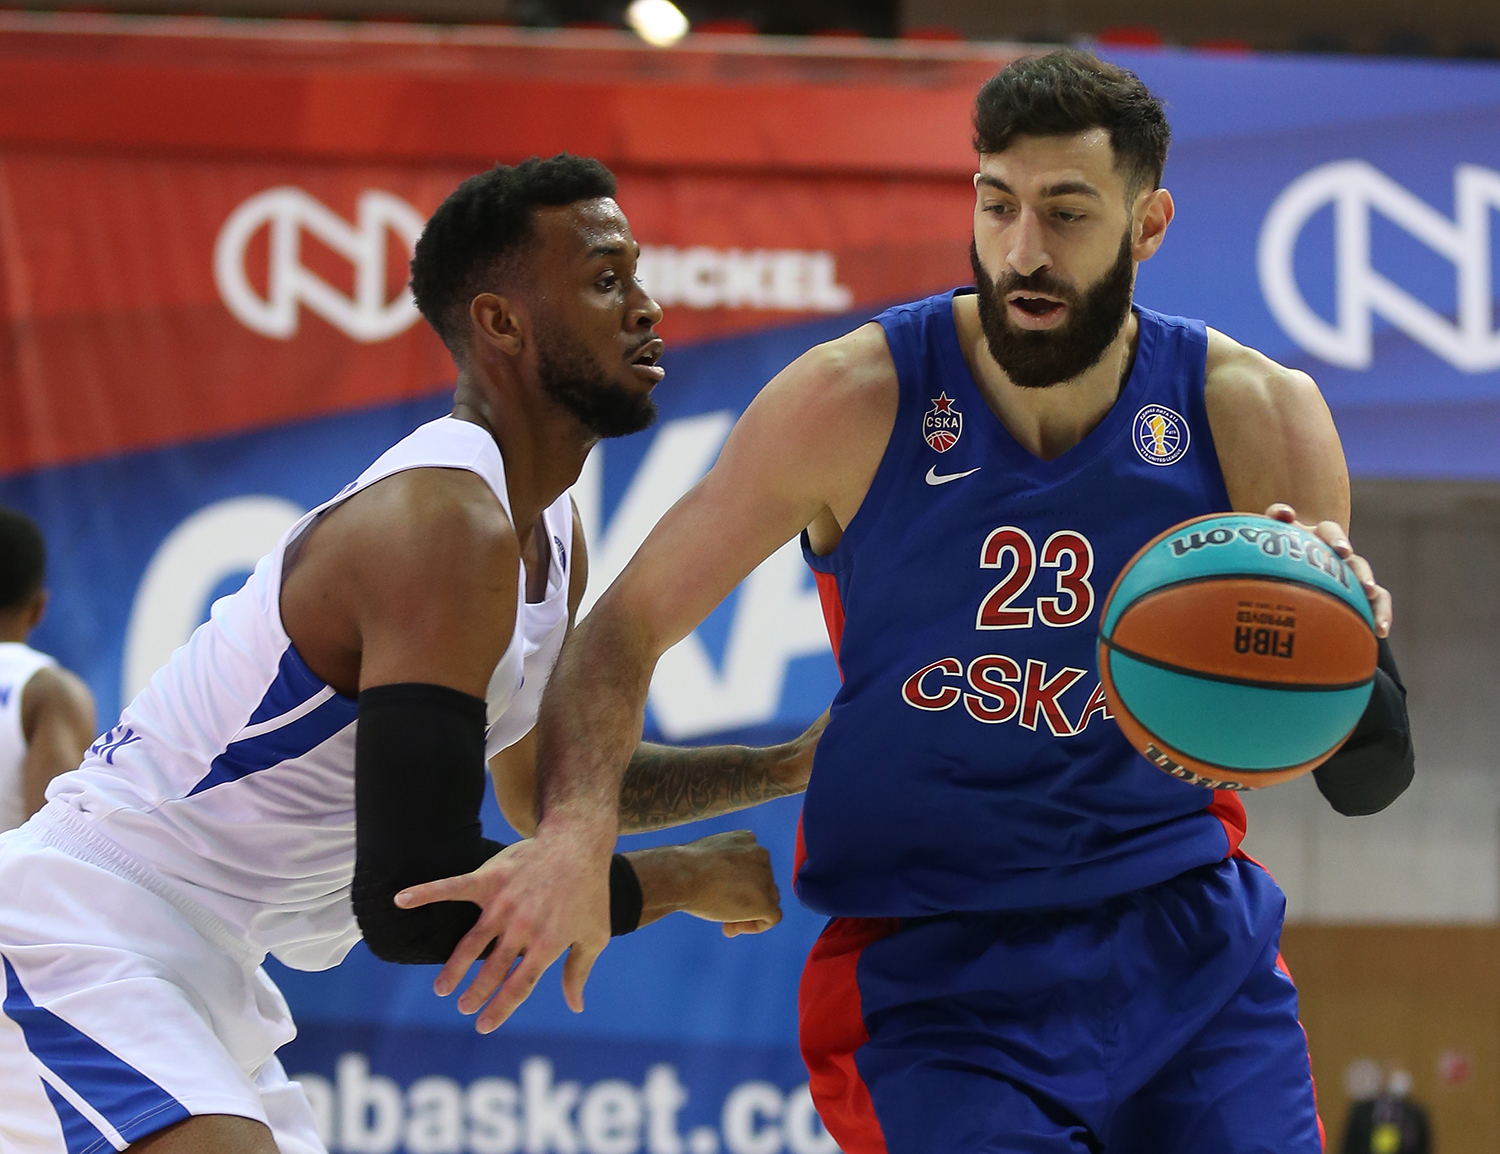 Ukhov’s sniper form helps CSKA down Enisey